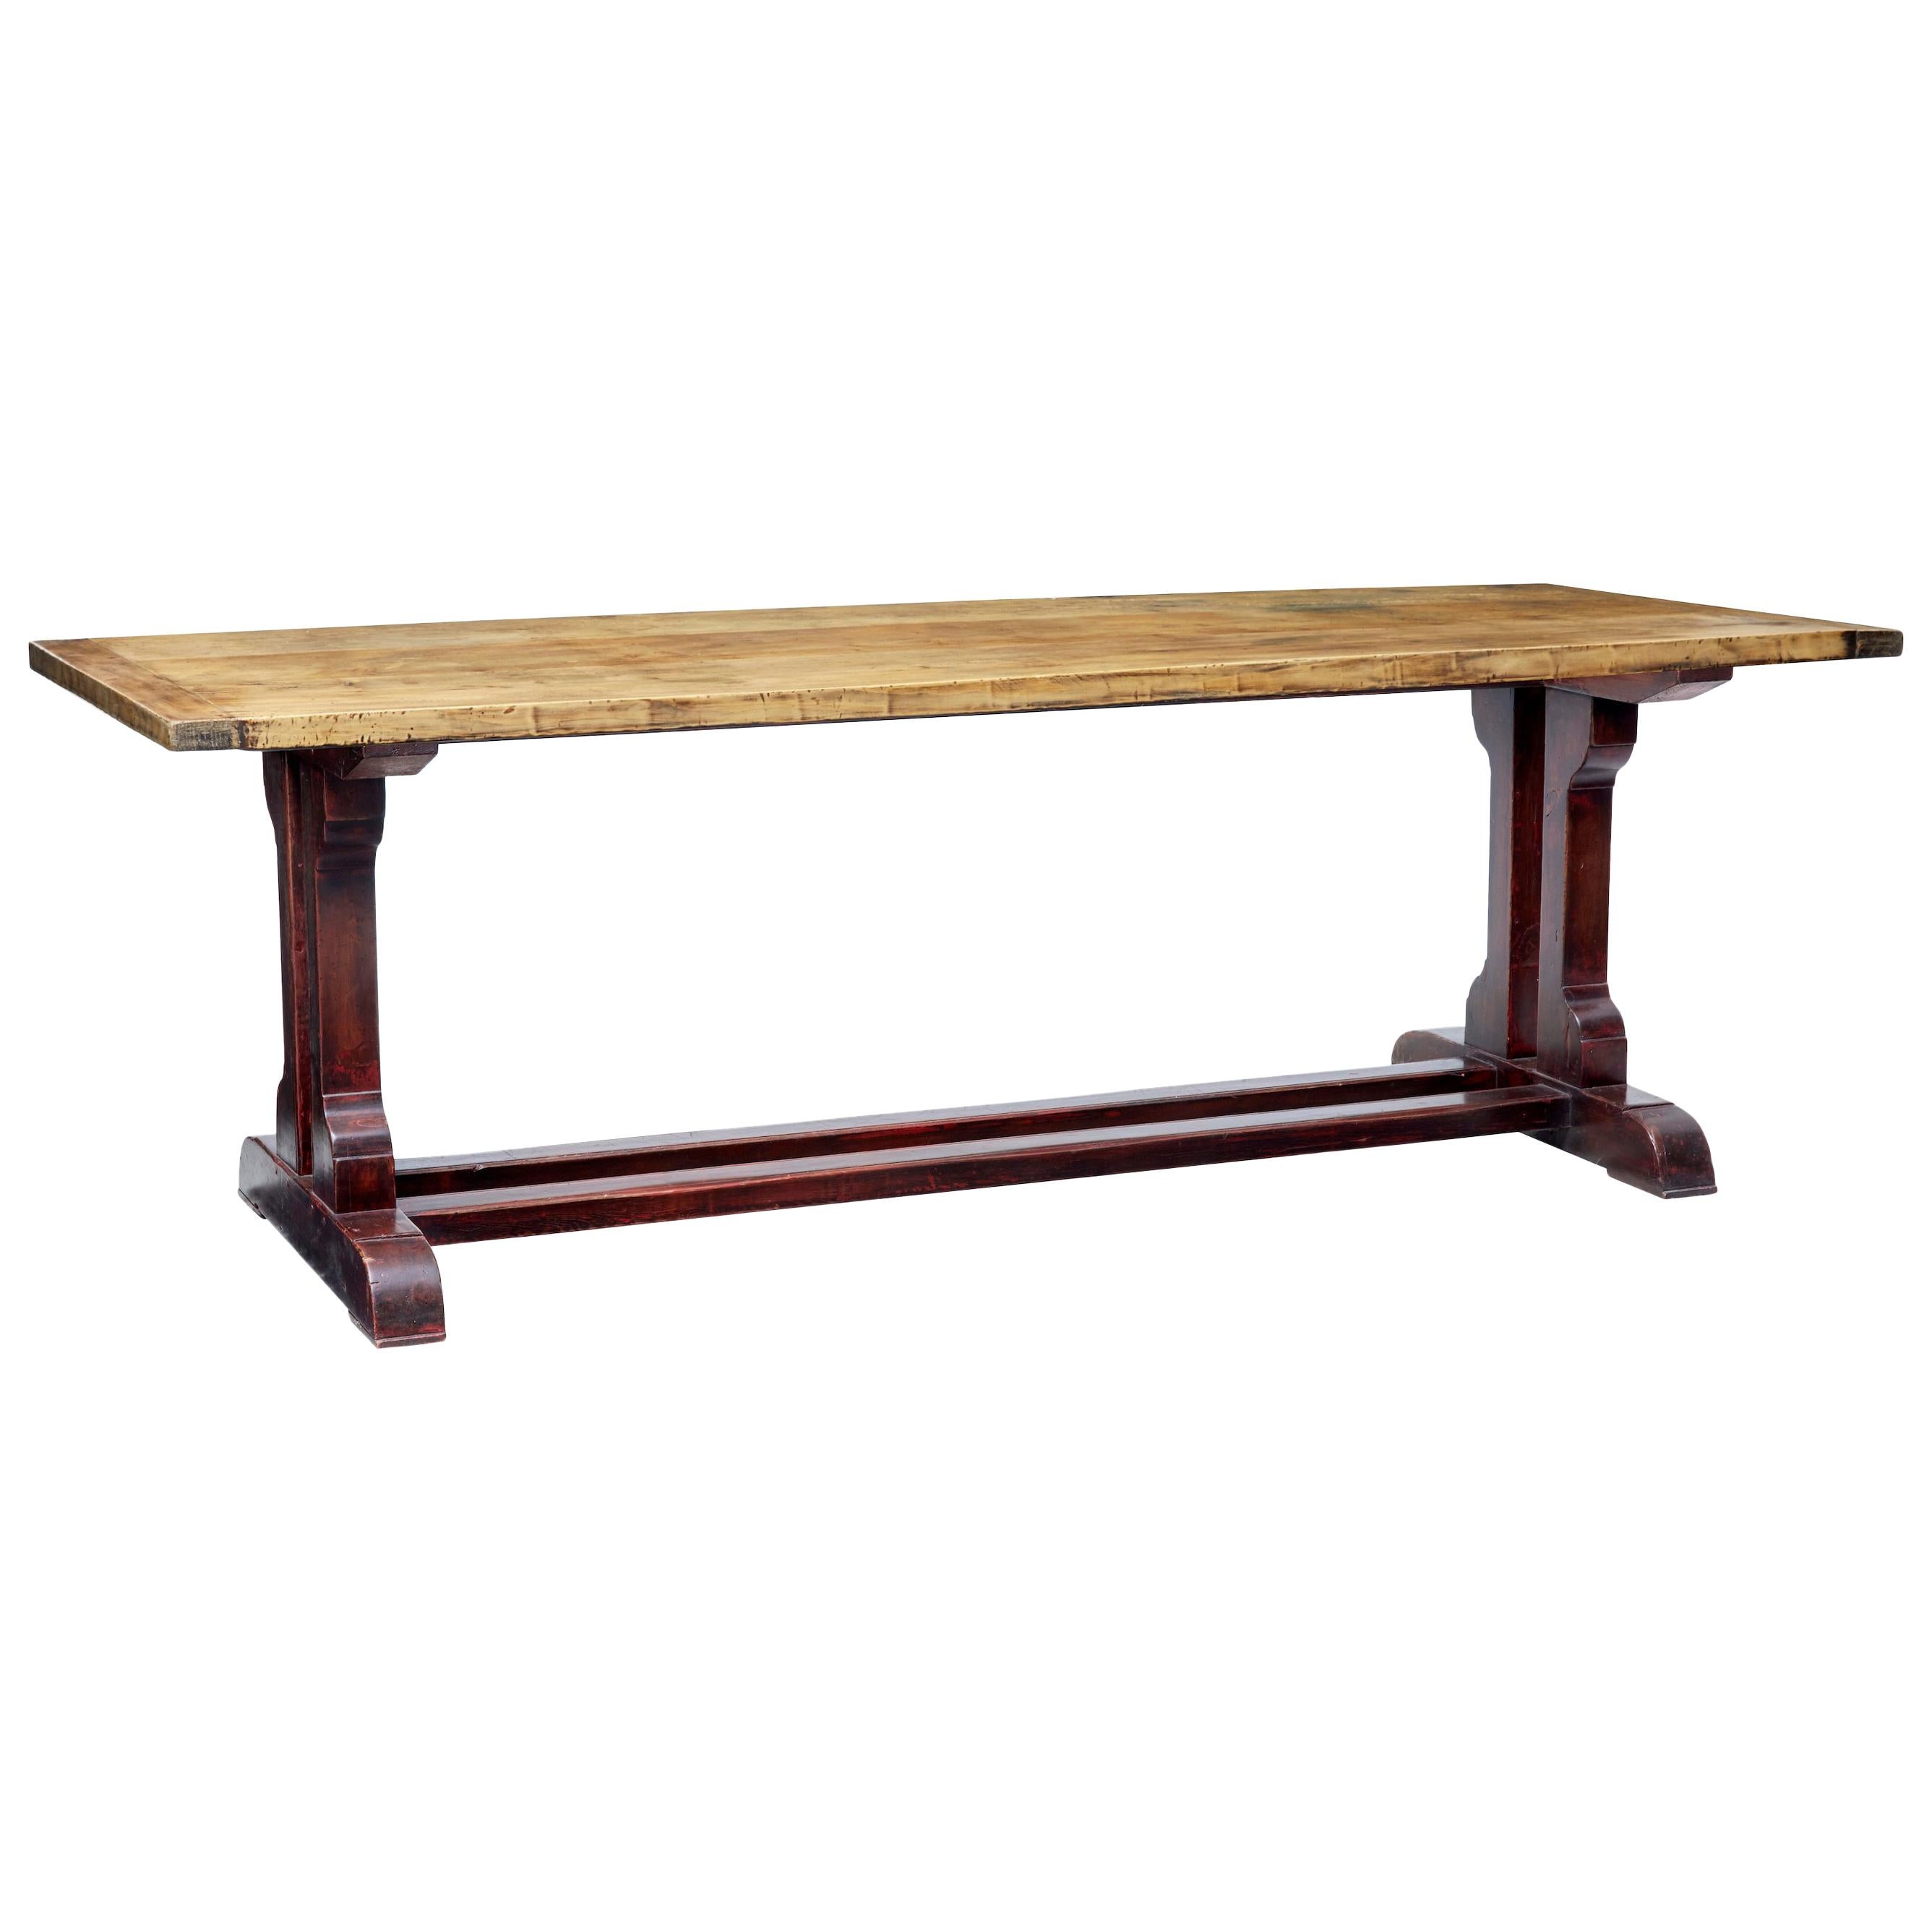 19th Century Swedish Pine Refectory Table with Painted Base